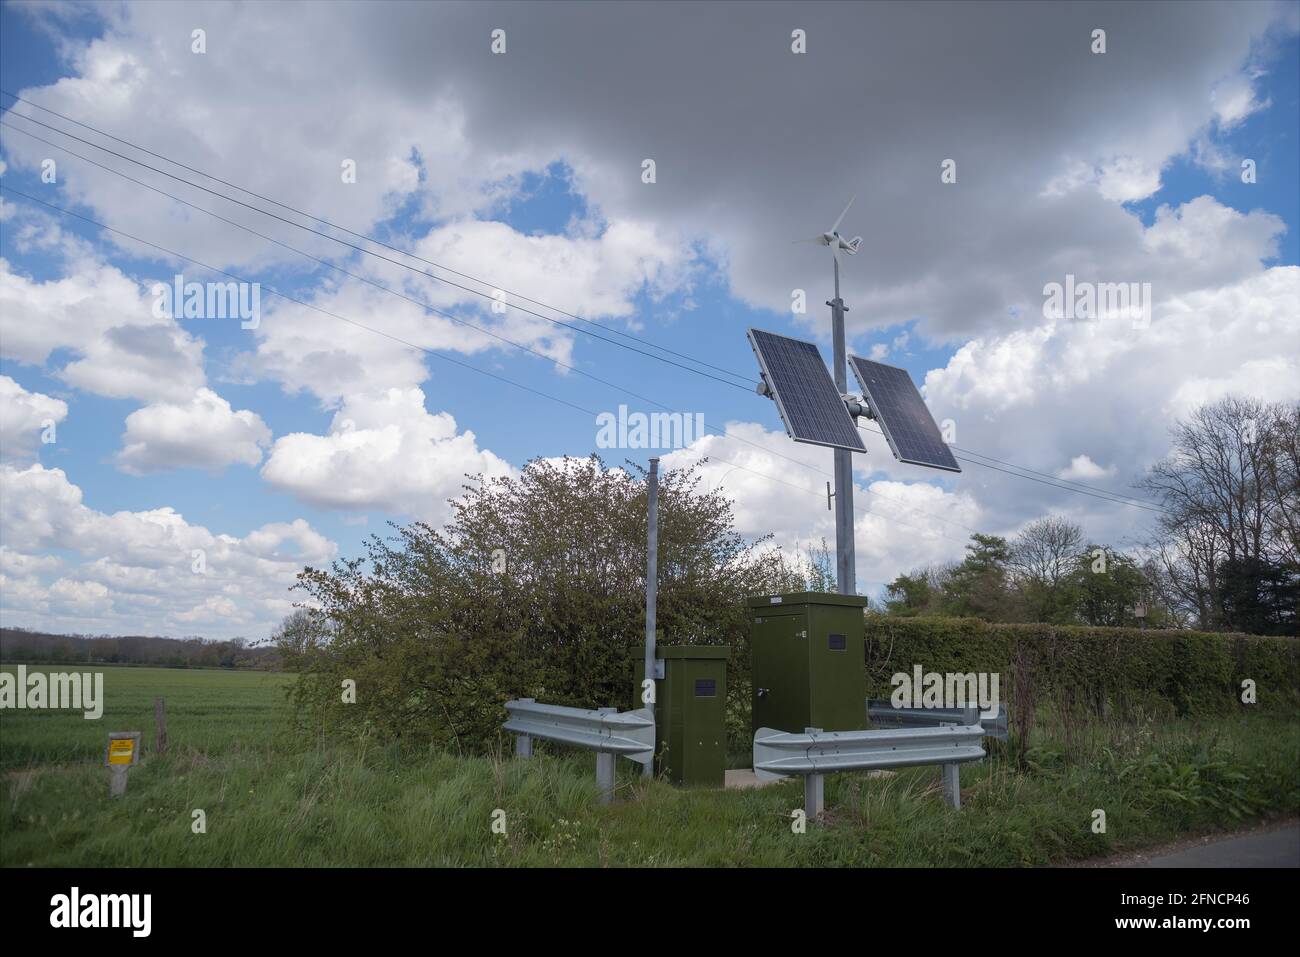 Small wind turbine protected from traffic on isolated country lane monitoring a gas substation distribution point Stock Photo